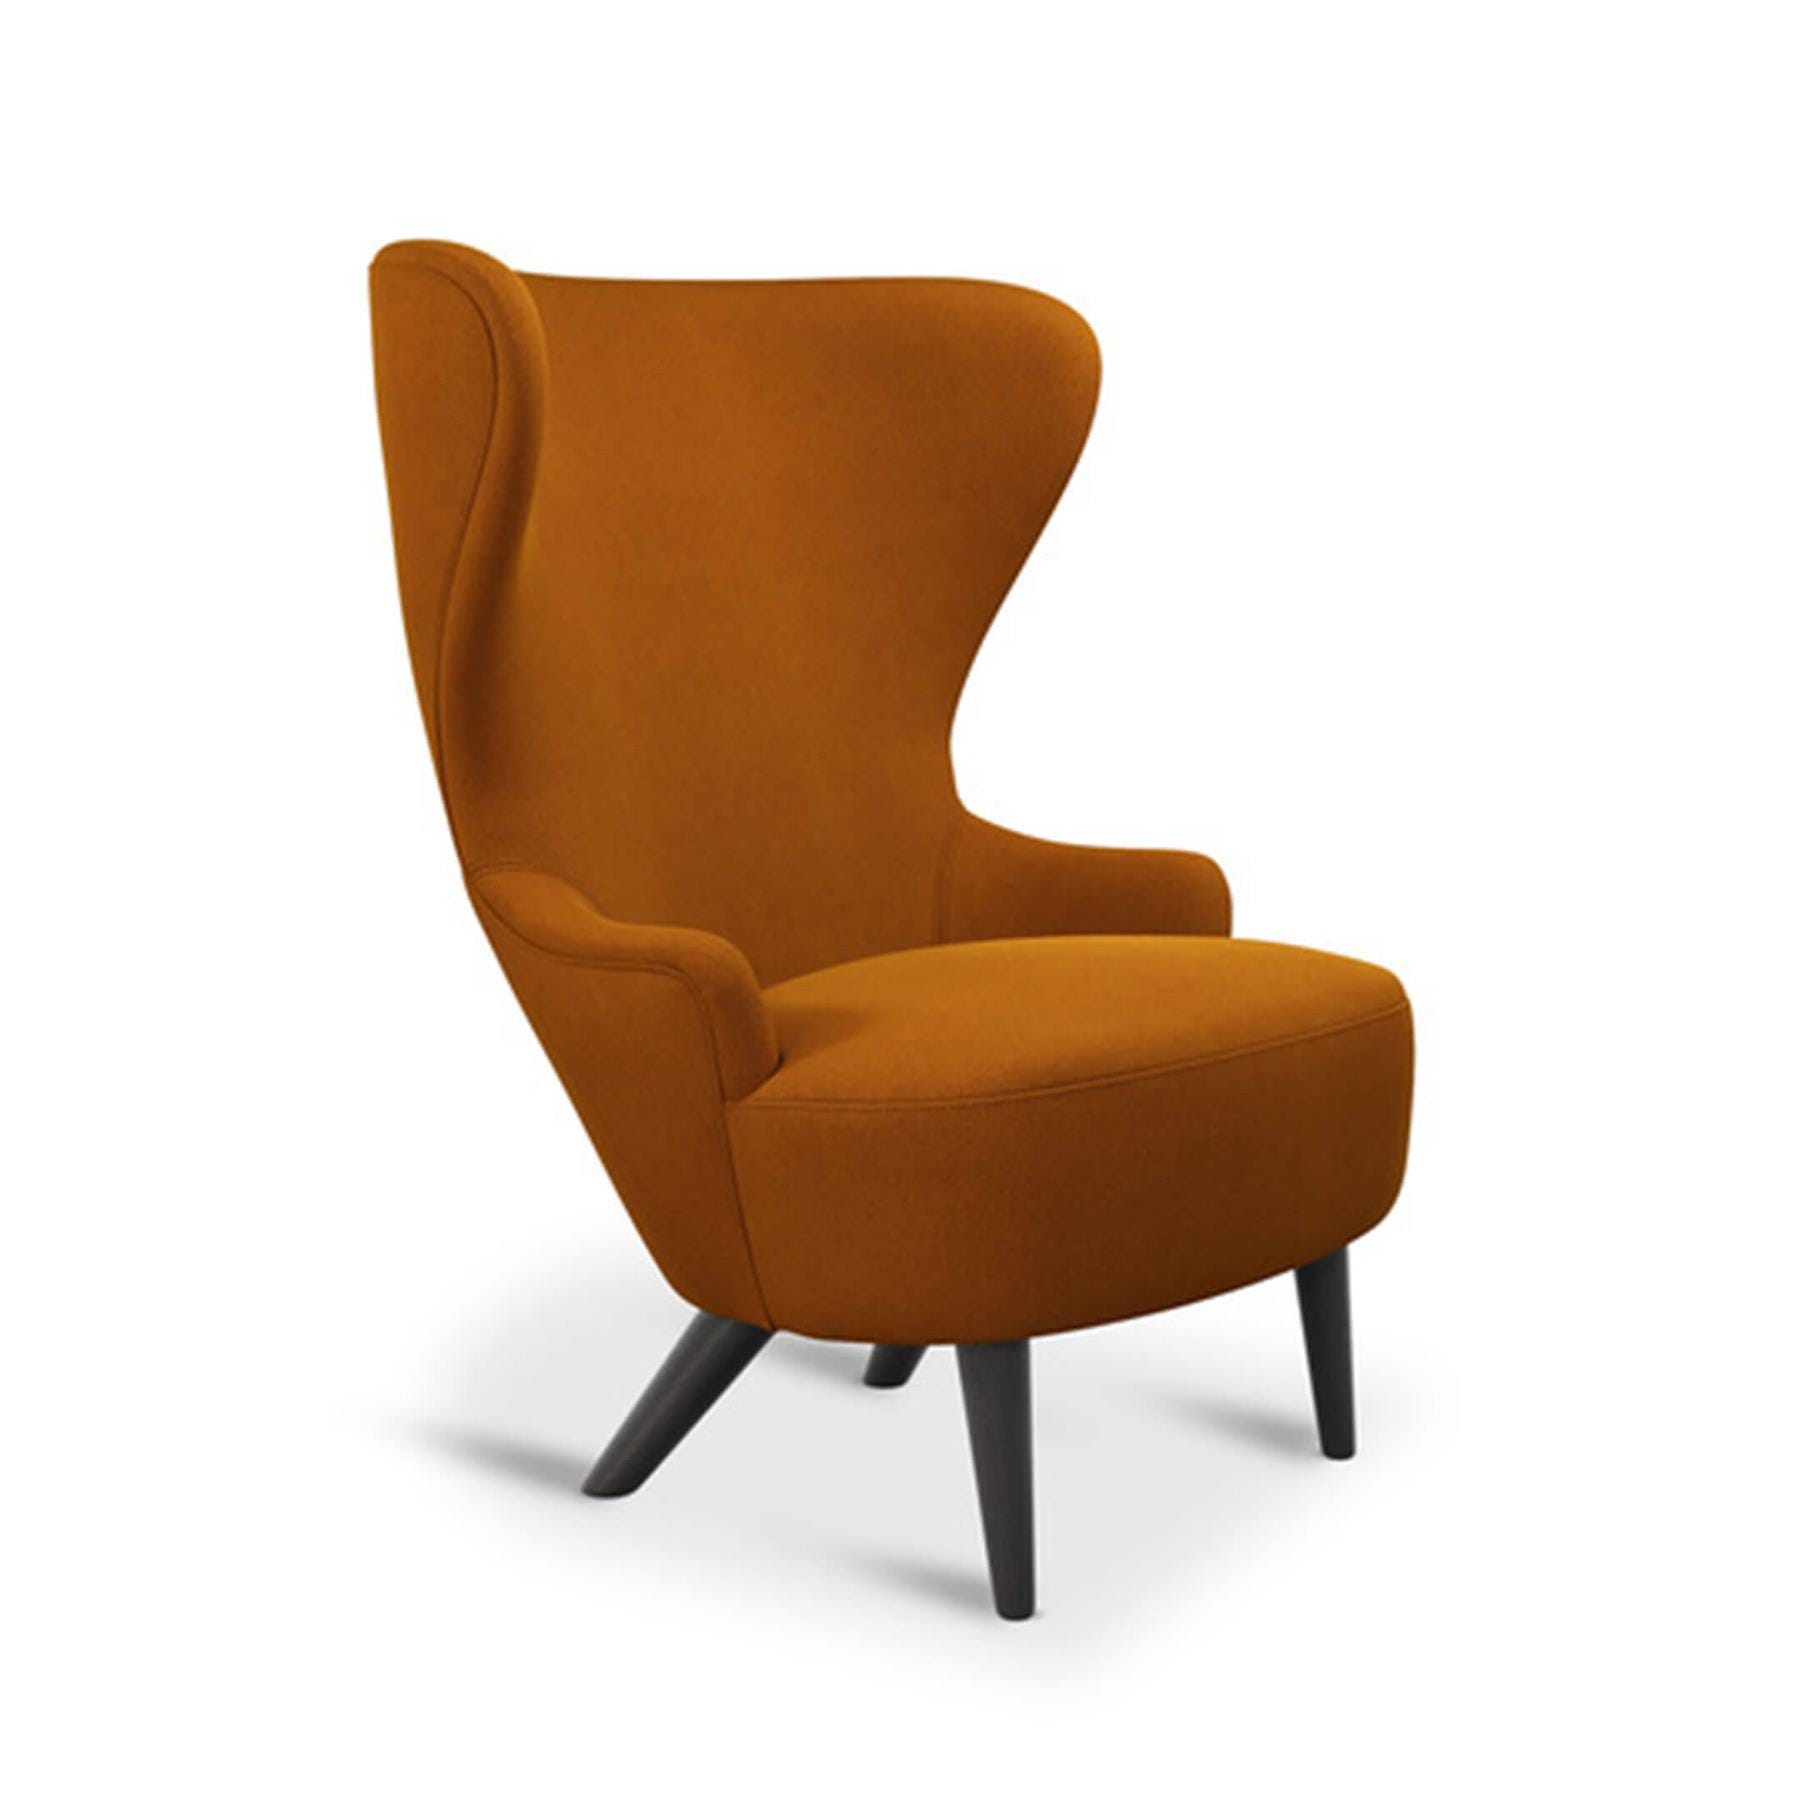 Tom Dixon Wingback Micro Armchair Micro Armchair Hallingdal 65 0200 Natural Brown Designer Furniture From Holloways Of Ludlow